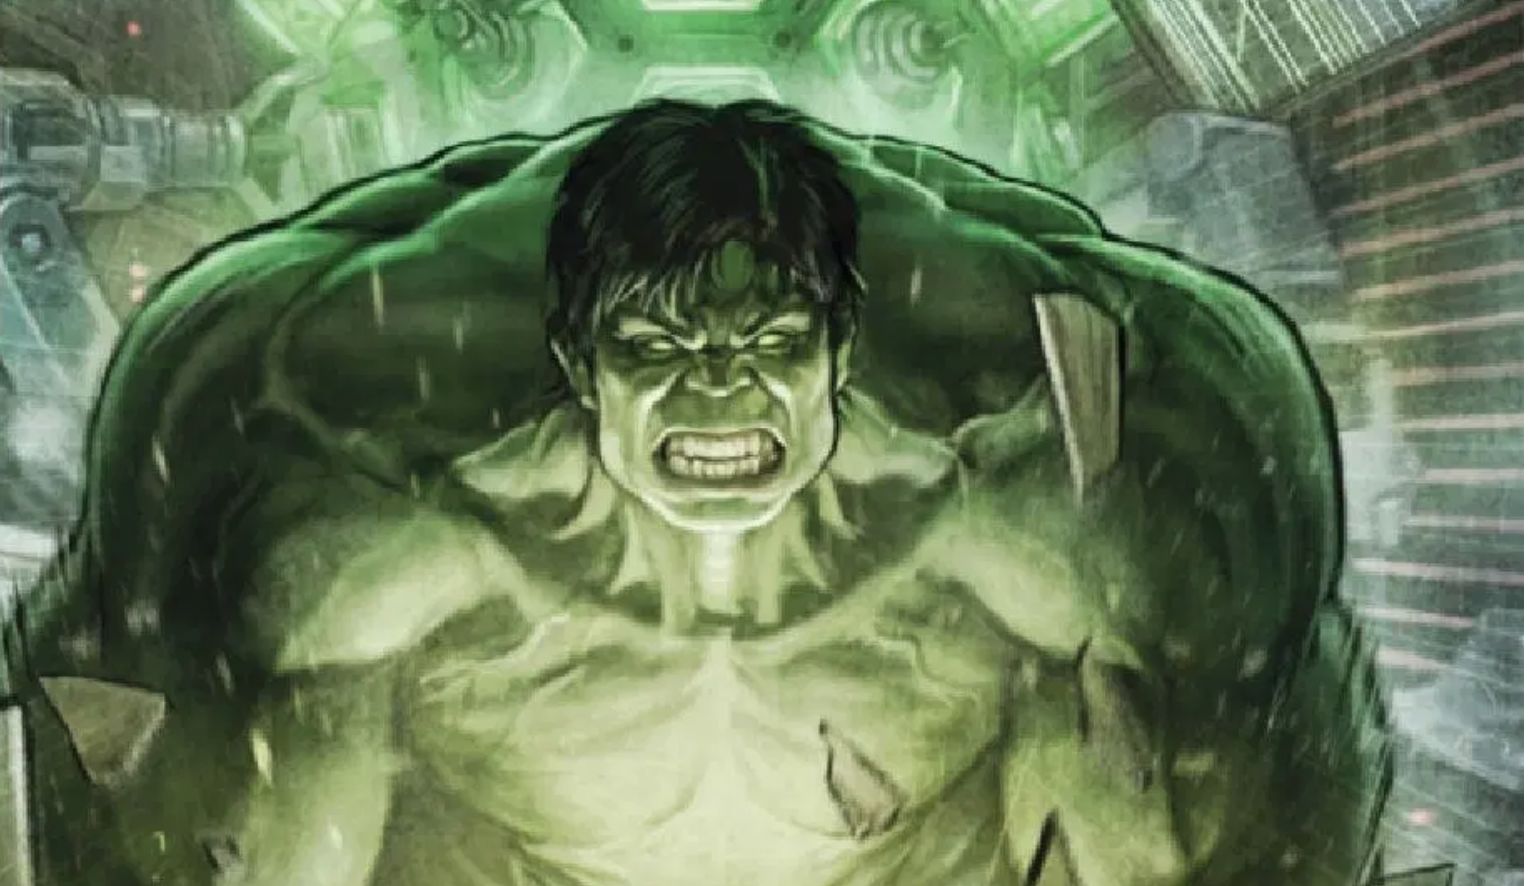 Marvel Avengers: Hulk #1 video game prequel one-shot (Preview) | SYFY WIRE